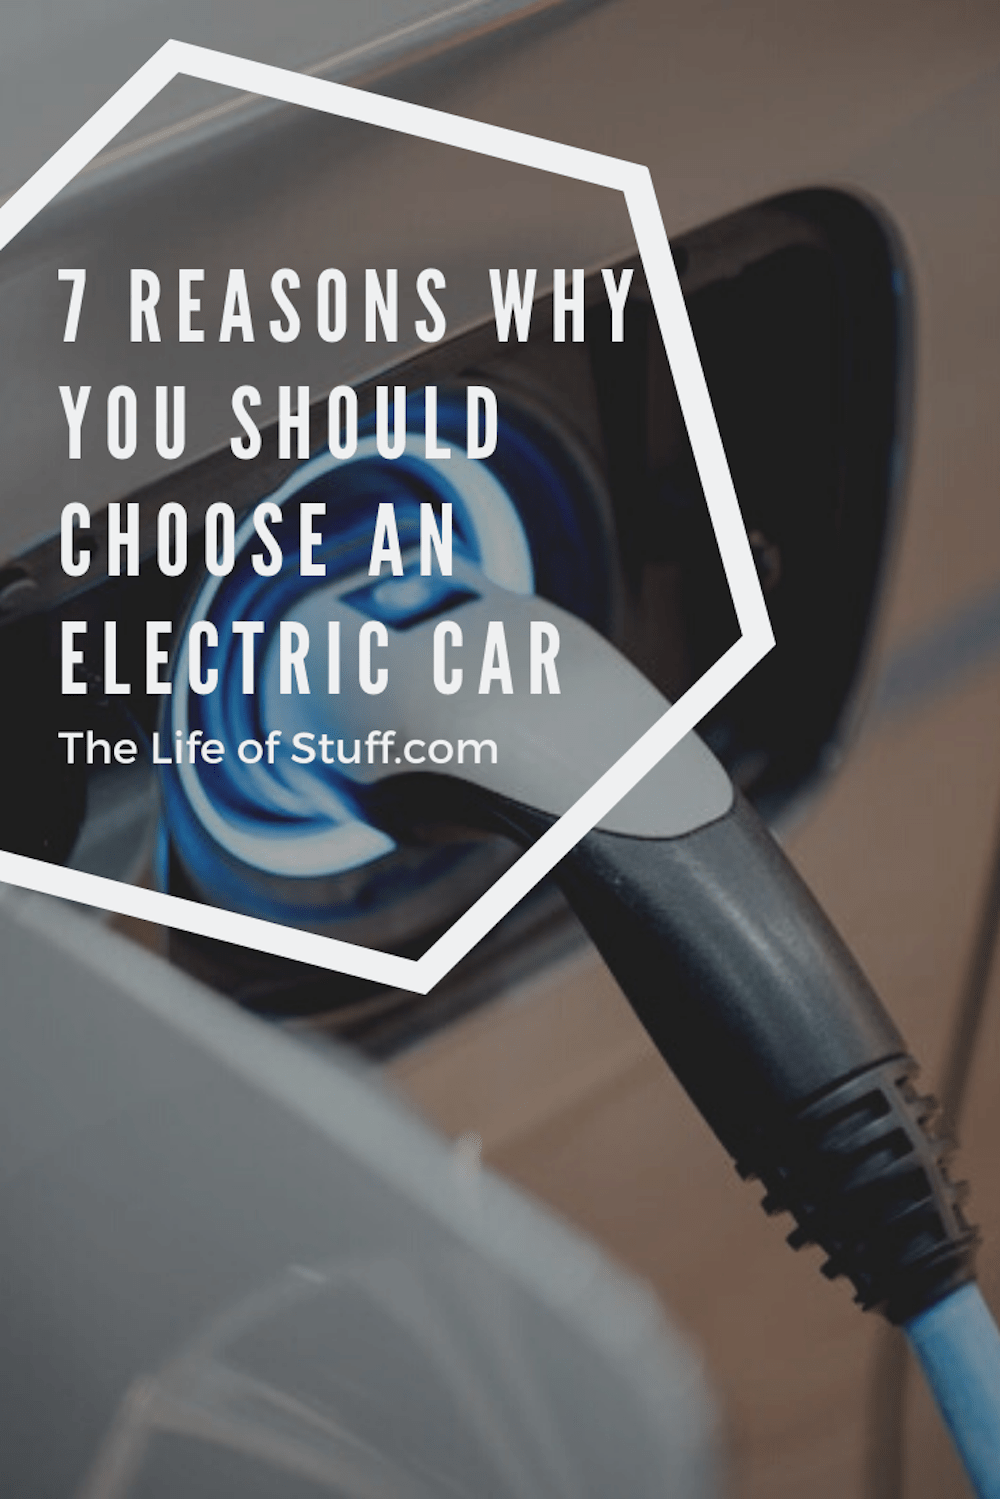 7 Reasons Why You Should Choose an Electric Car - The Life of Stuff